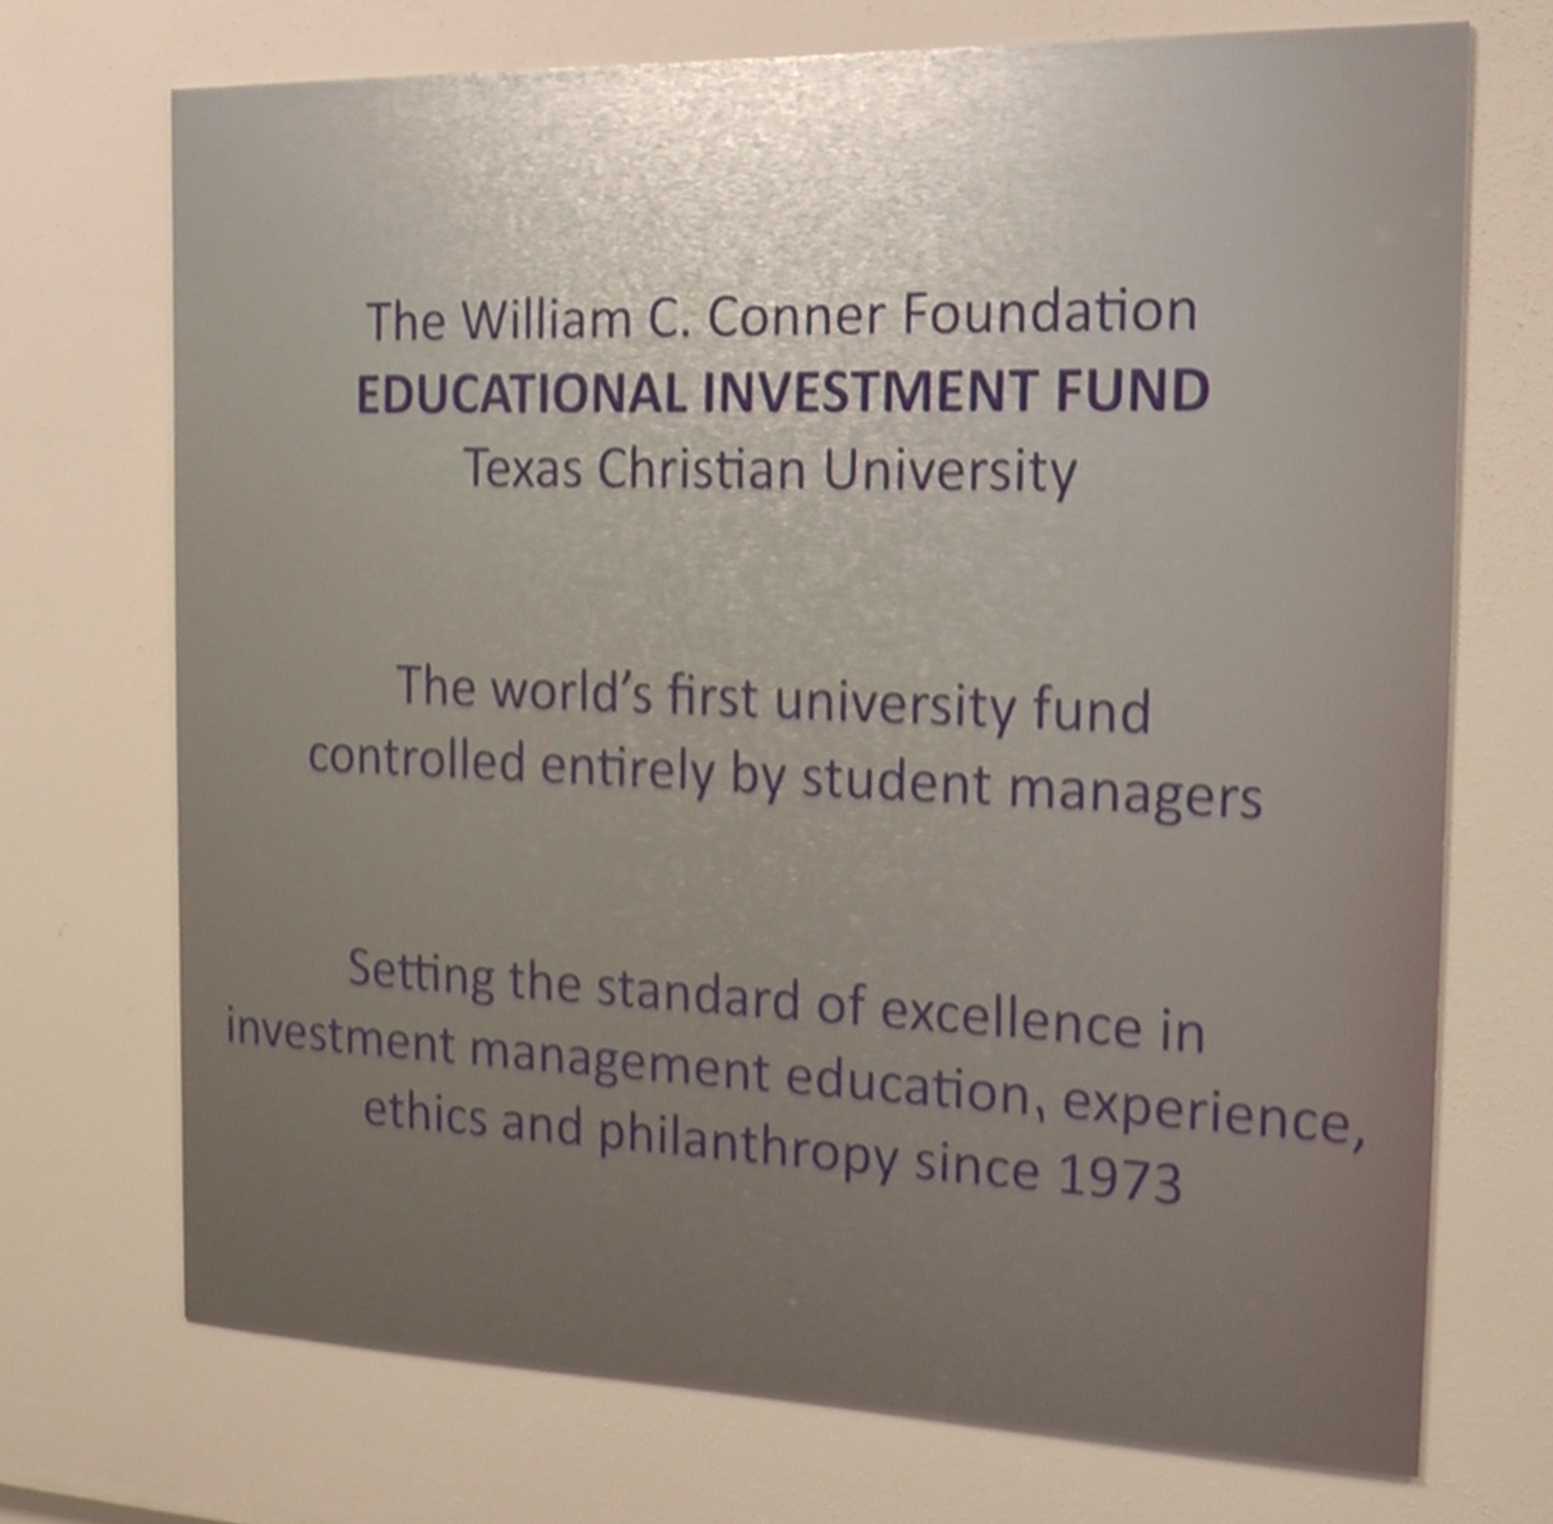 The William C. Conner Foundation Educational Investment Fund is the first ever student-run investment fun.